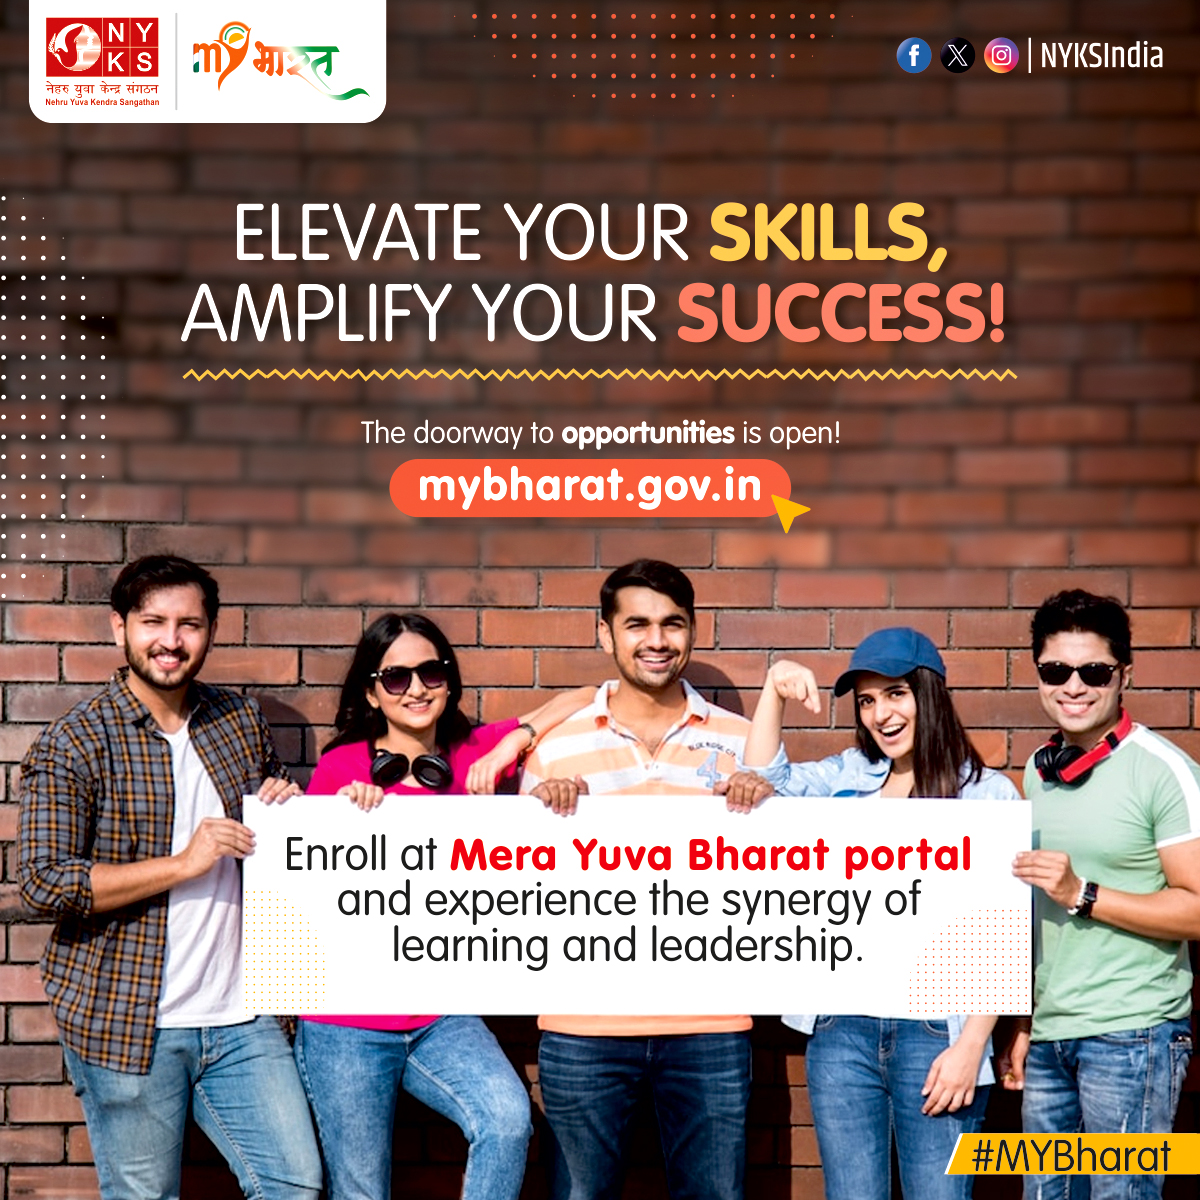 Join the #MeraYuvaBharat portal and immerse yourself in the synergy of learning and leadership. Your journey towards excellence starts here! 💡🌐 Register Now: mybharat.gov.in #SkillDevelopment #LeadershipJourney #MYBharat #NYKS